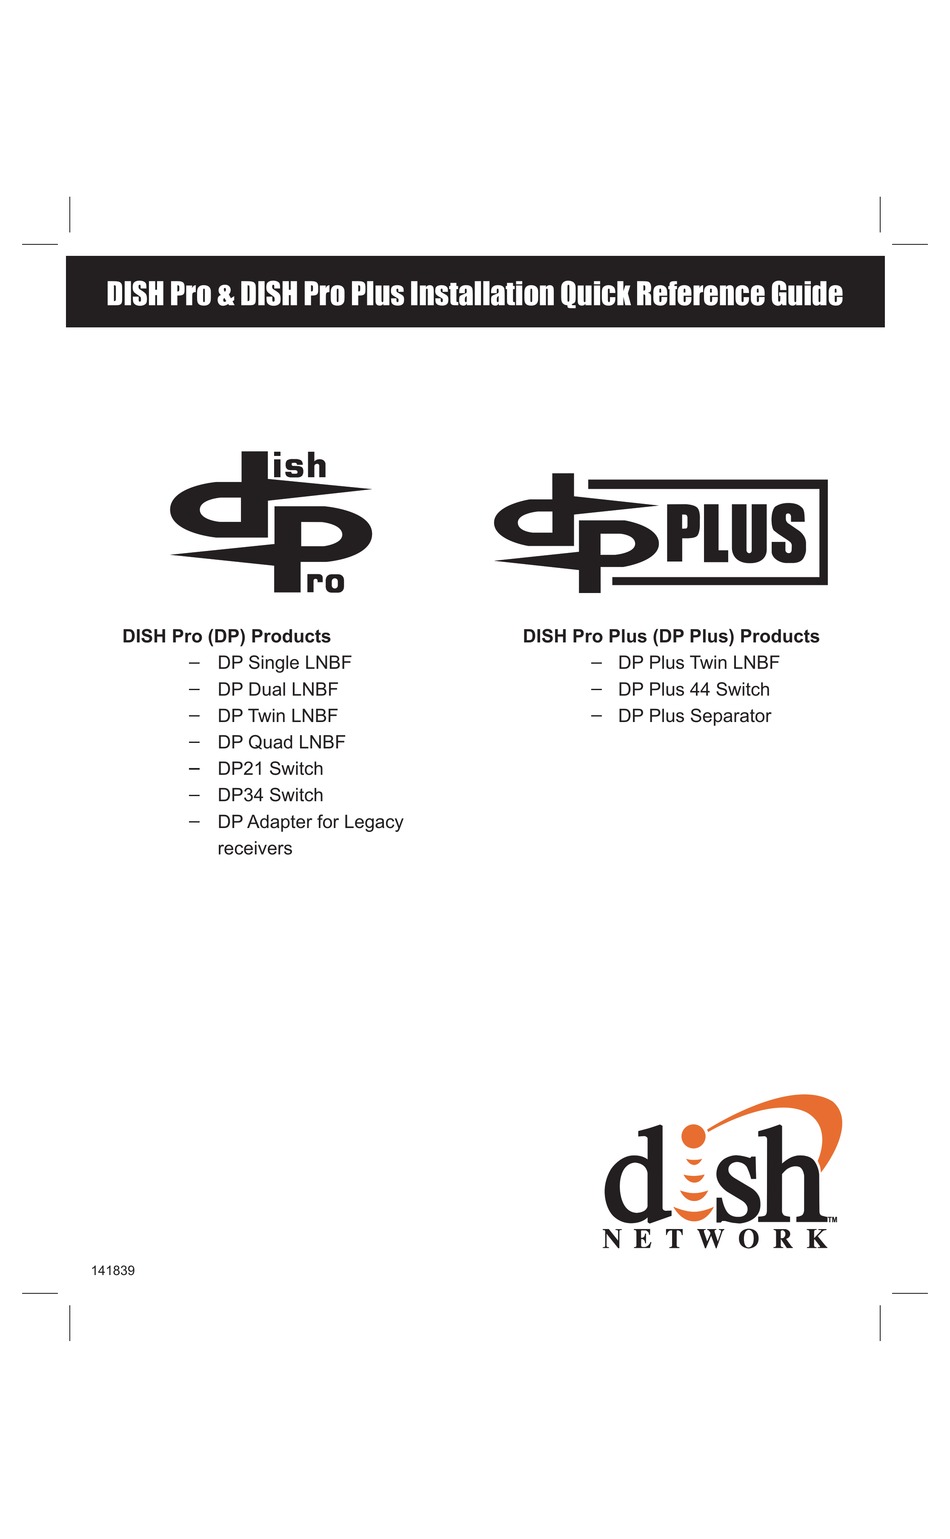 DISH NETWORK DISH PRO INSTALLATION QUICK REFERENCE MANUAL Pdf Download